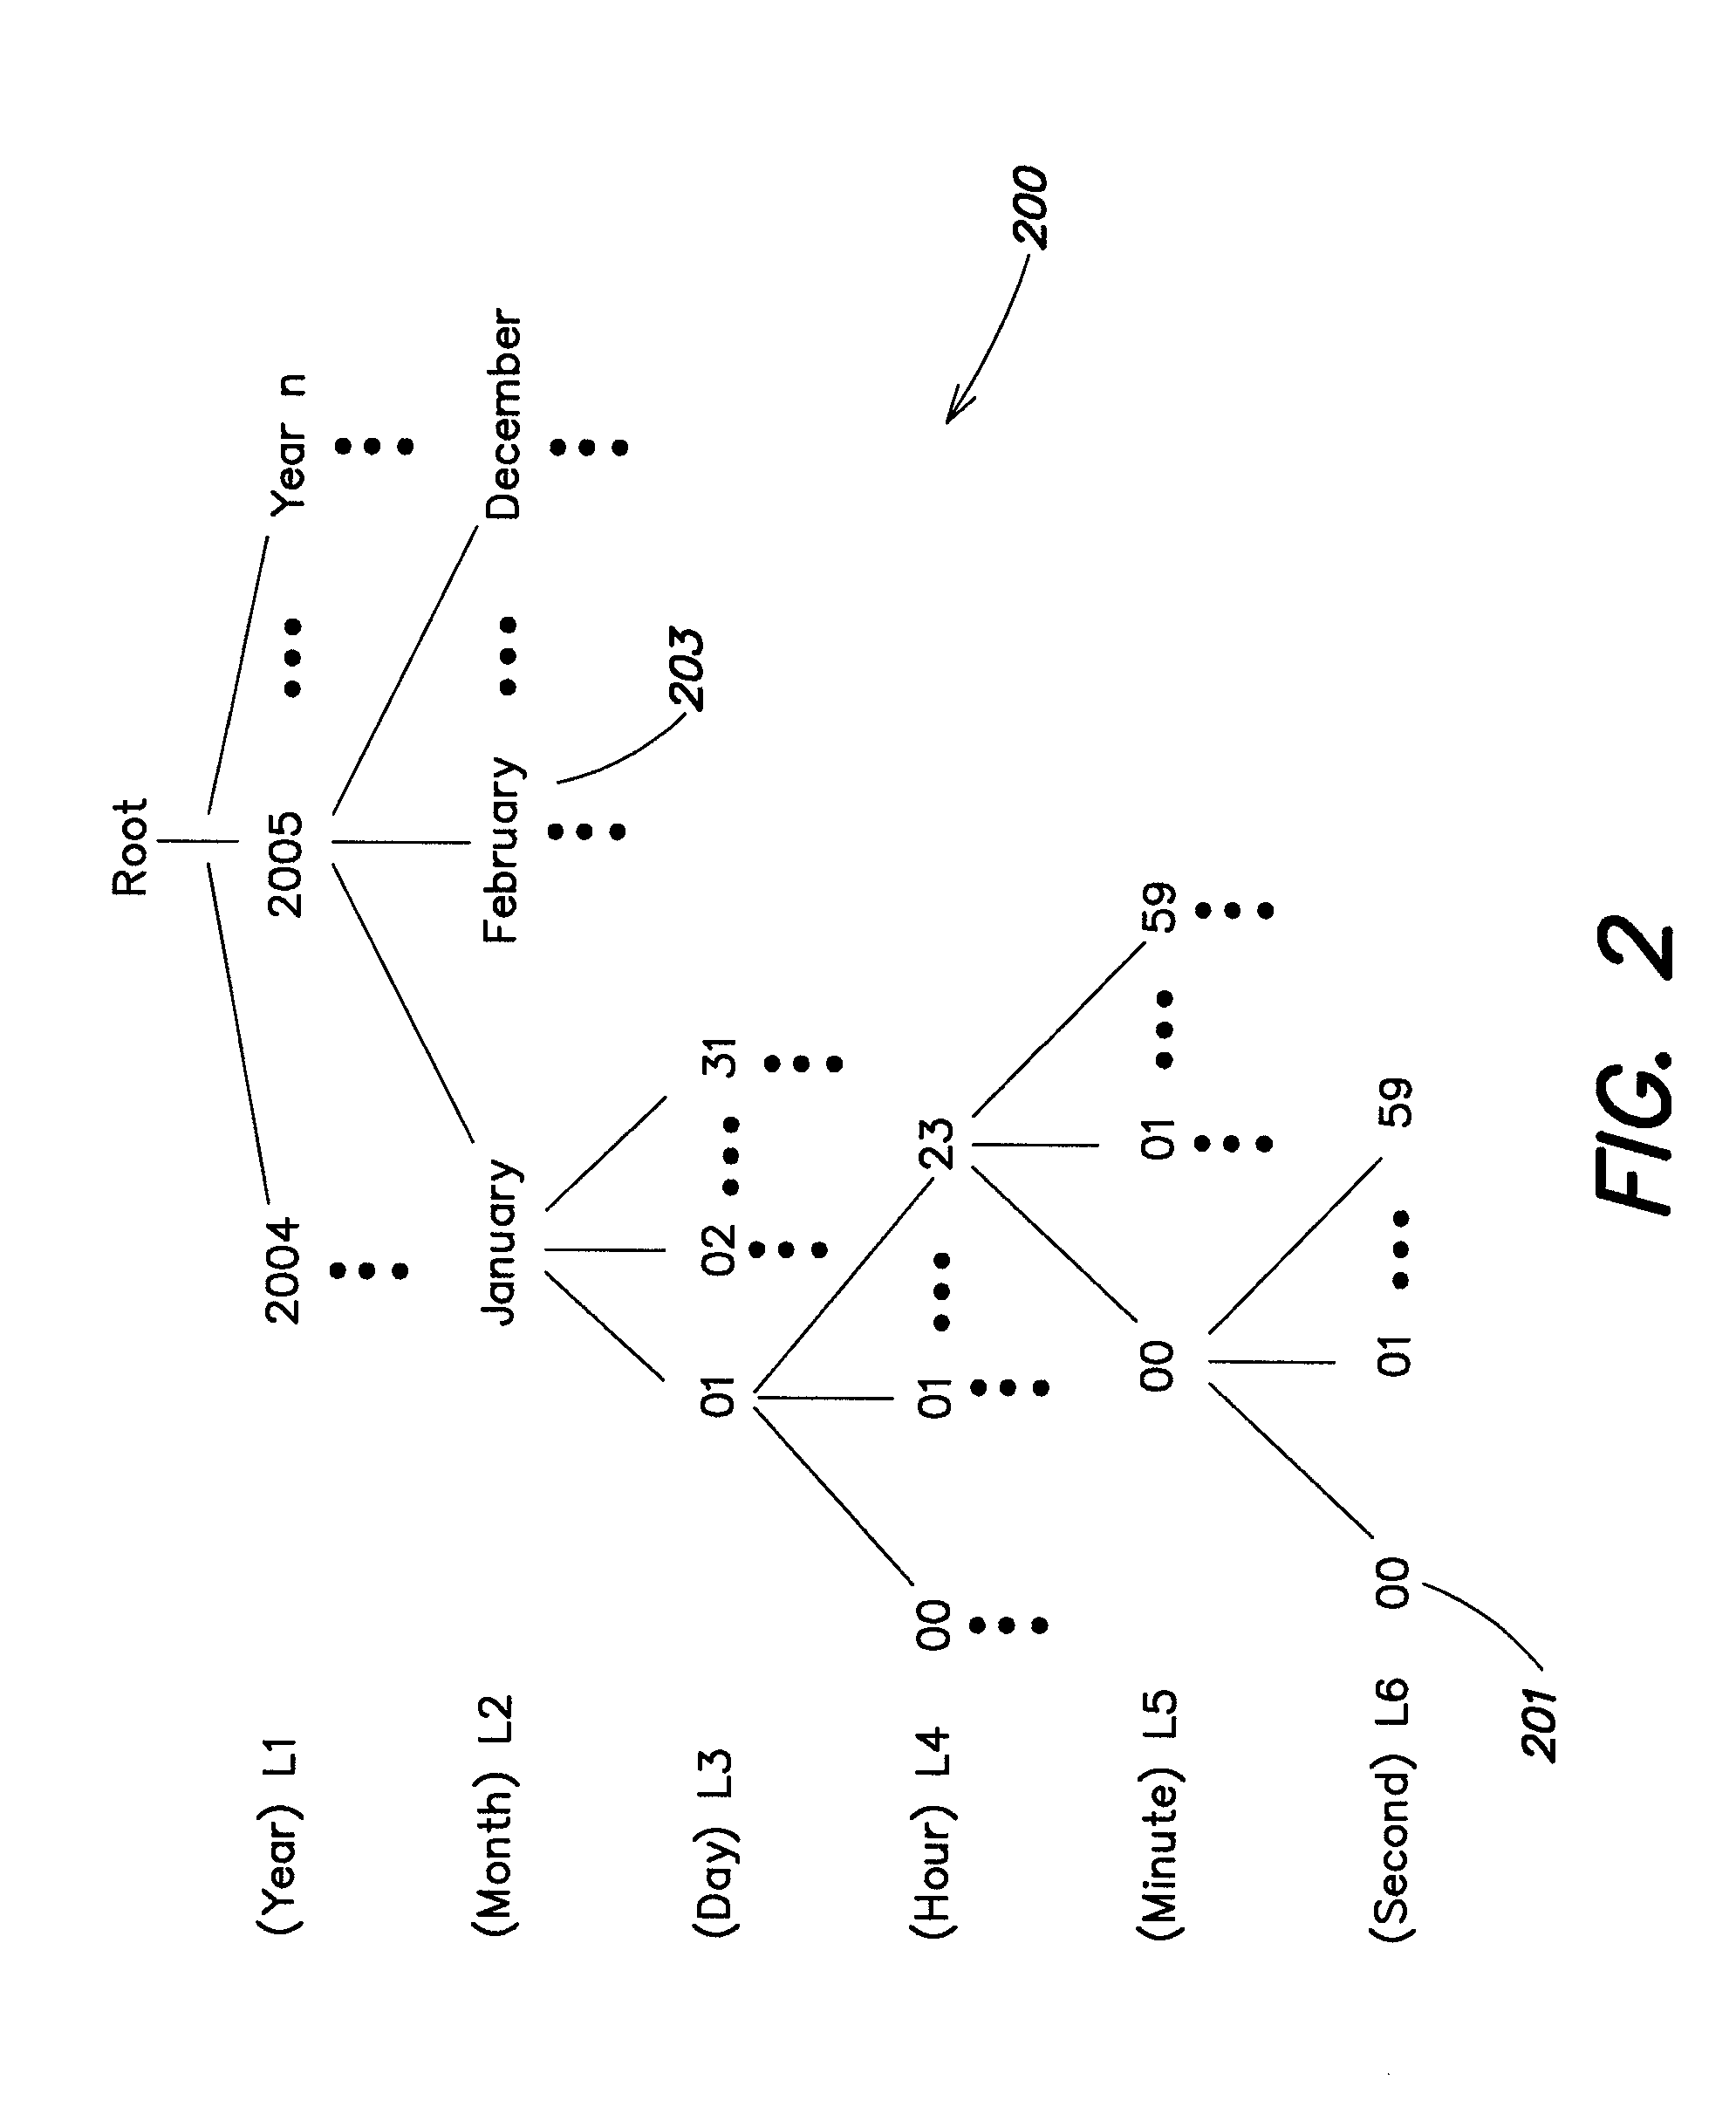 Methods and apparatus for managing the storage of content in a file system